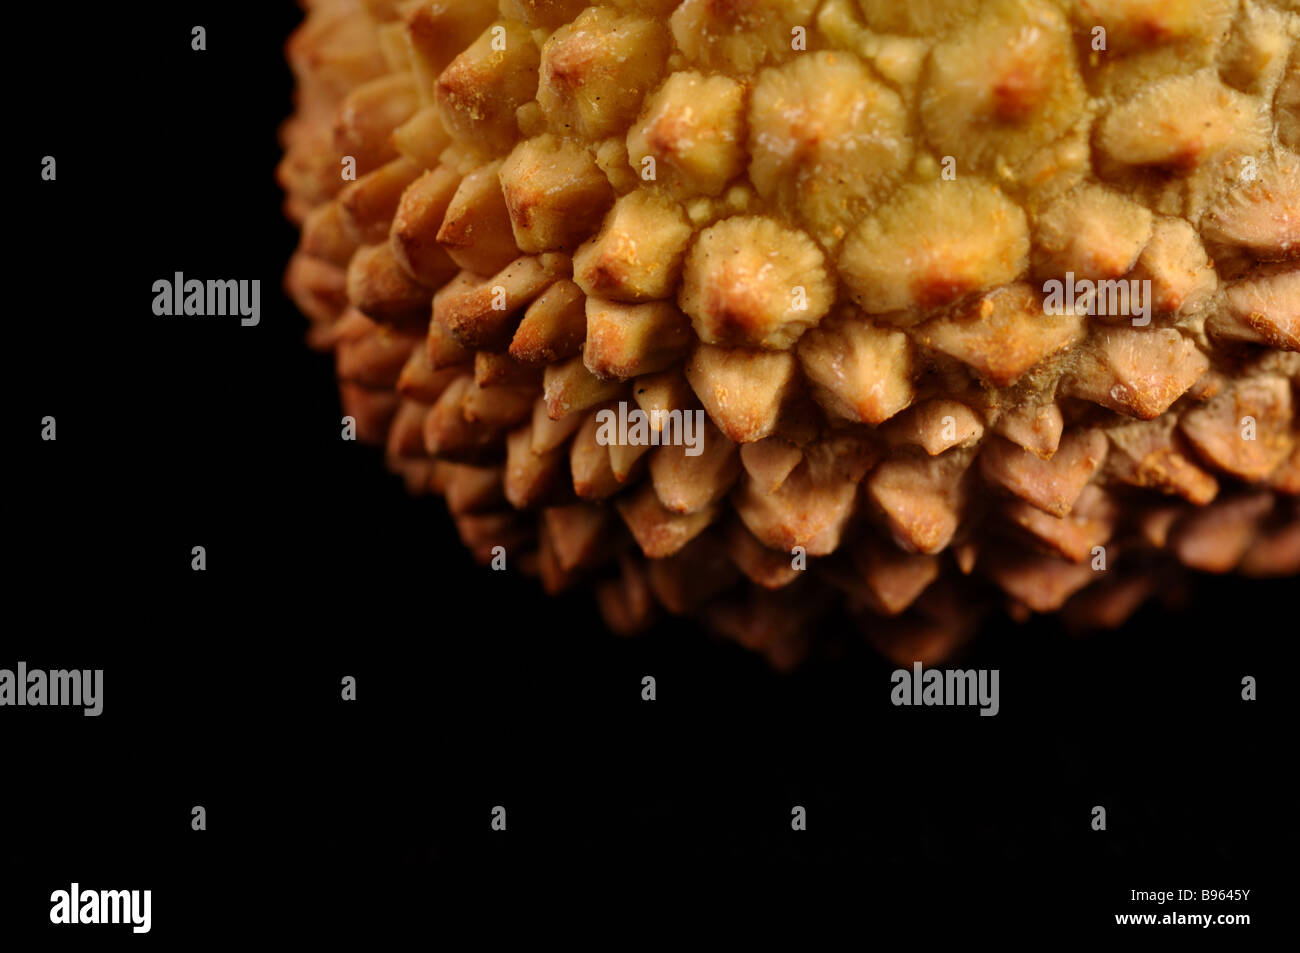 Group of ripe litchi fruits Stock Photo